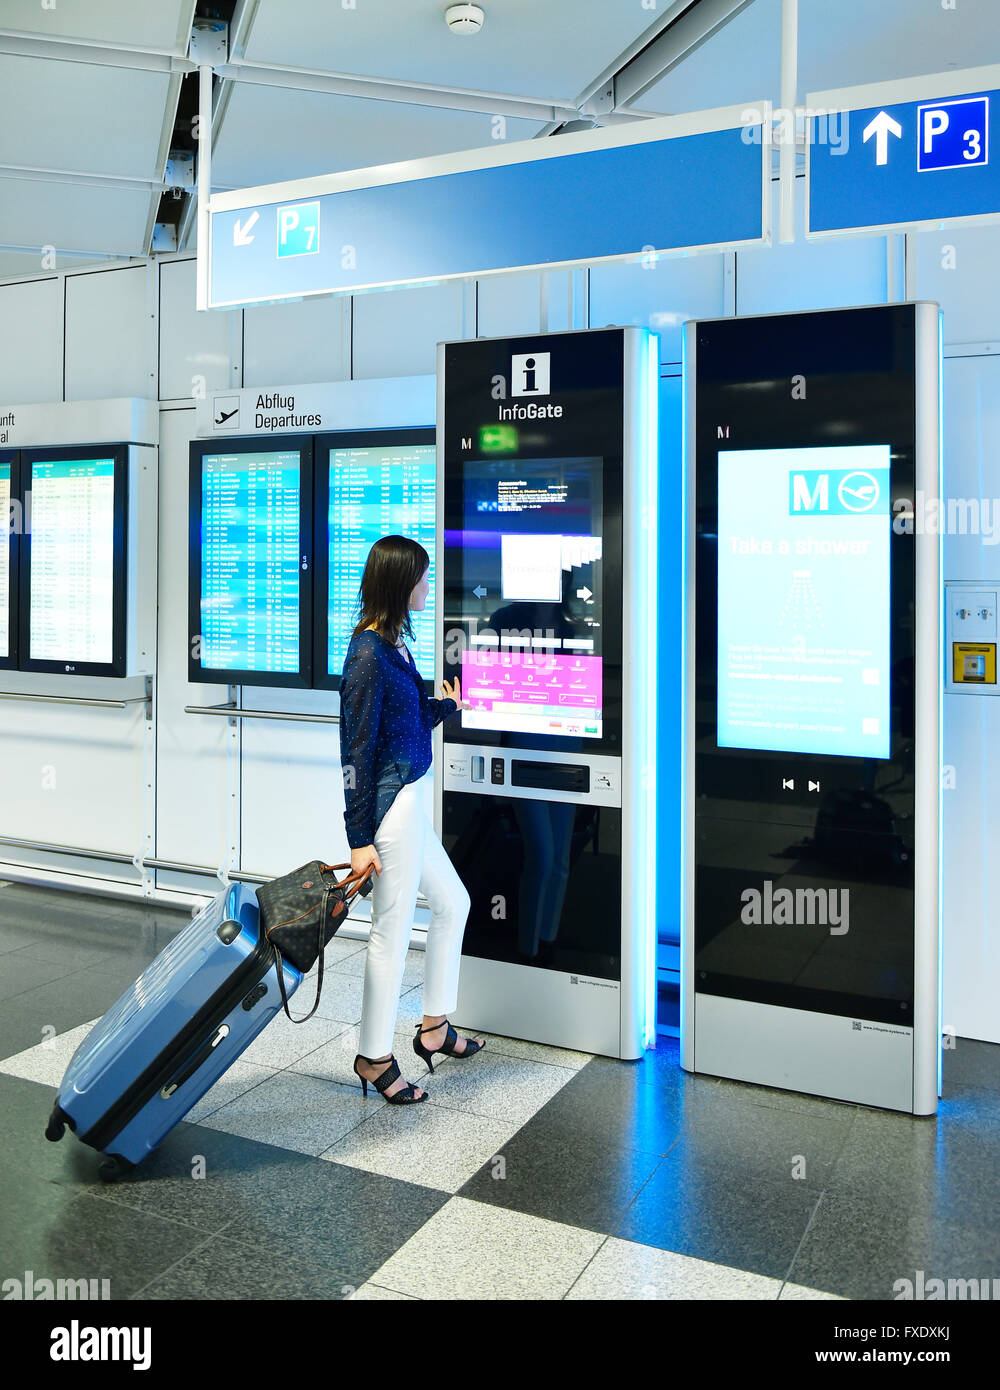 Woman with luggage at the InfoGate, information, Terminal 2, Munich Airport, Munich, Bavaria, Germany Stock Photo